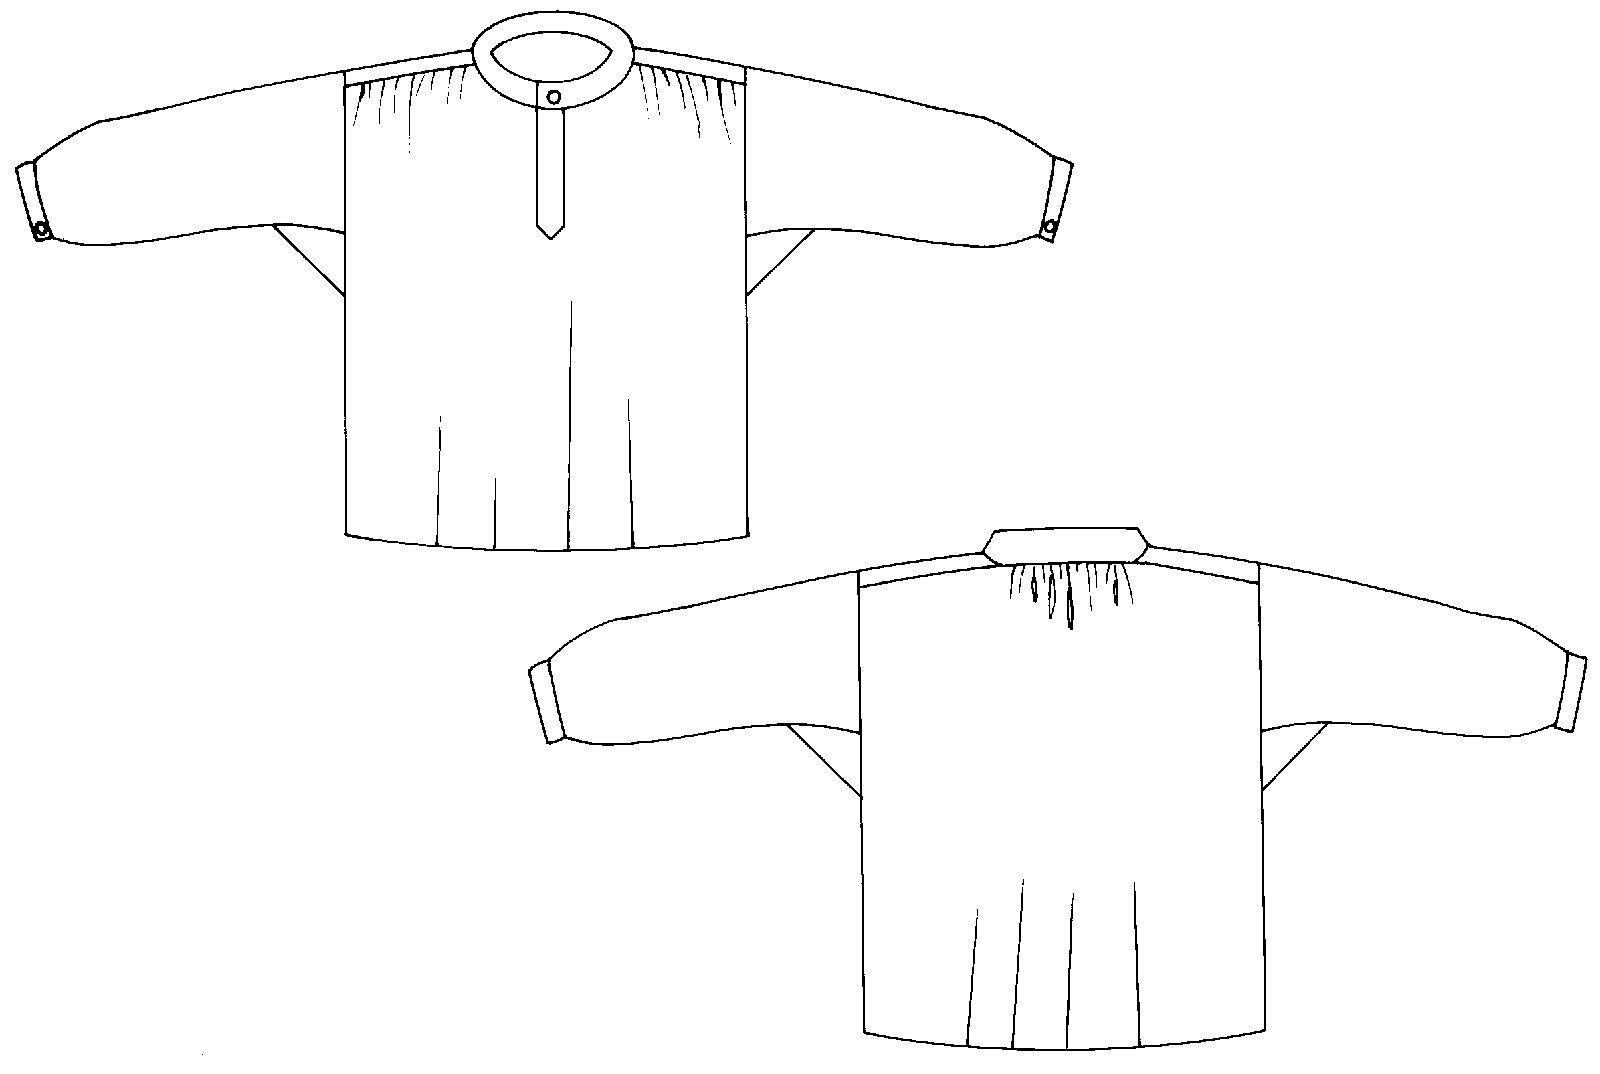 Flat drawings of the French Cheesemakers Smock, front and back